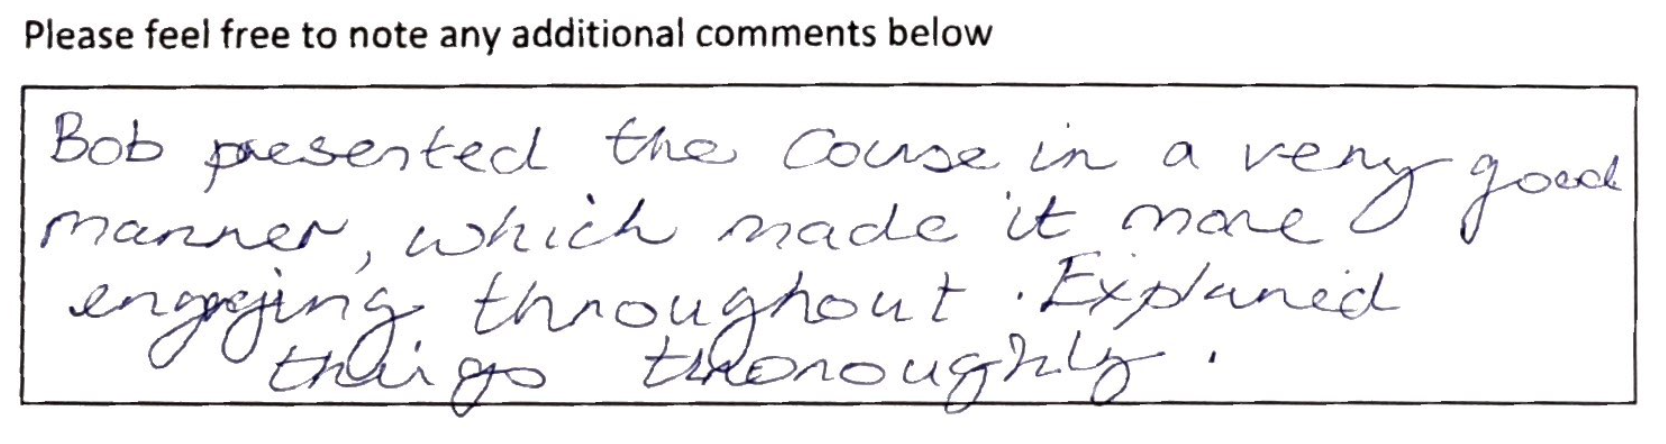 Feedback from previous First Aid courses